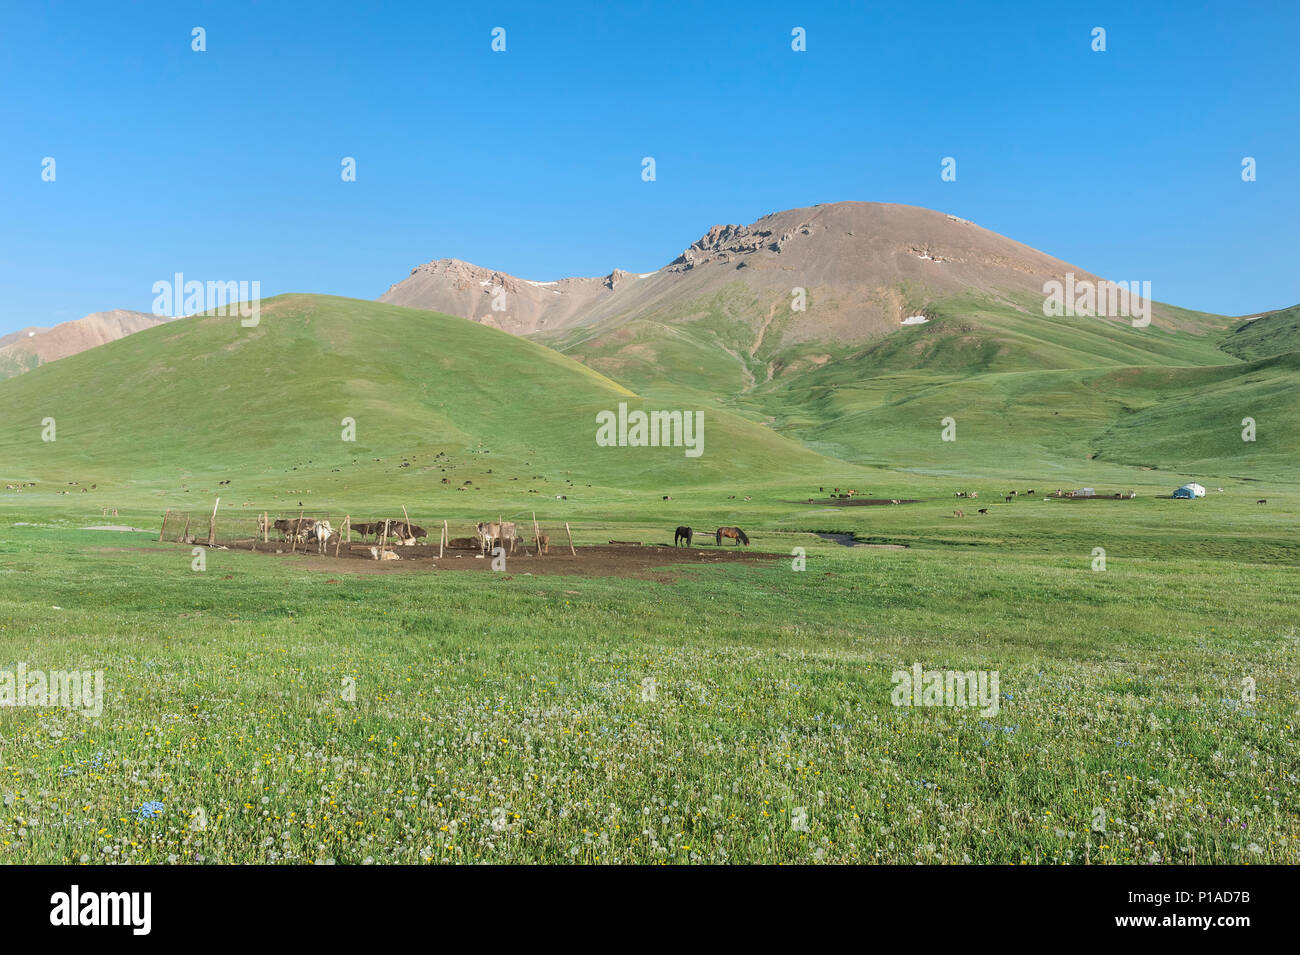 Nomad yurt camp, Group of cows and horses, Song Kol Lake, Naryn province, Kyrgyzstan, Central Asia Stock Photo